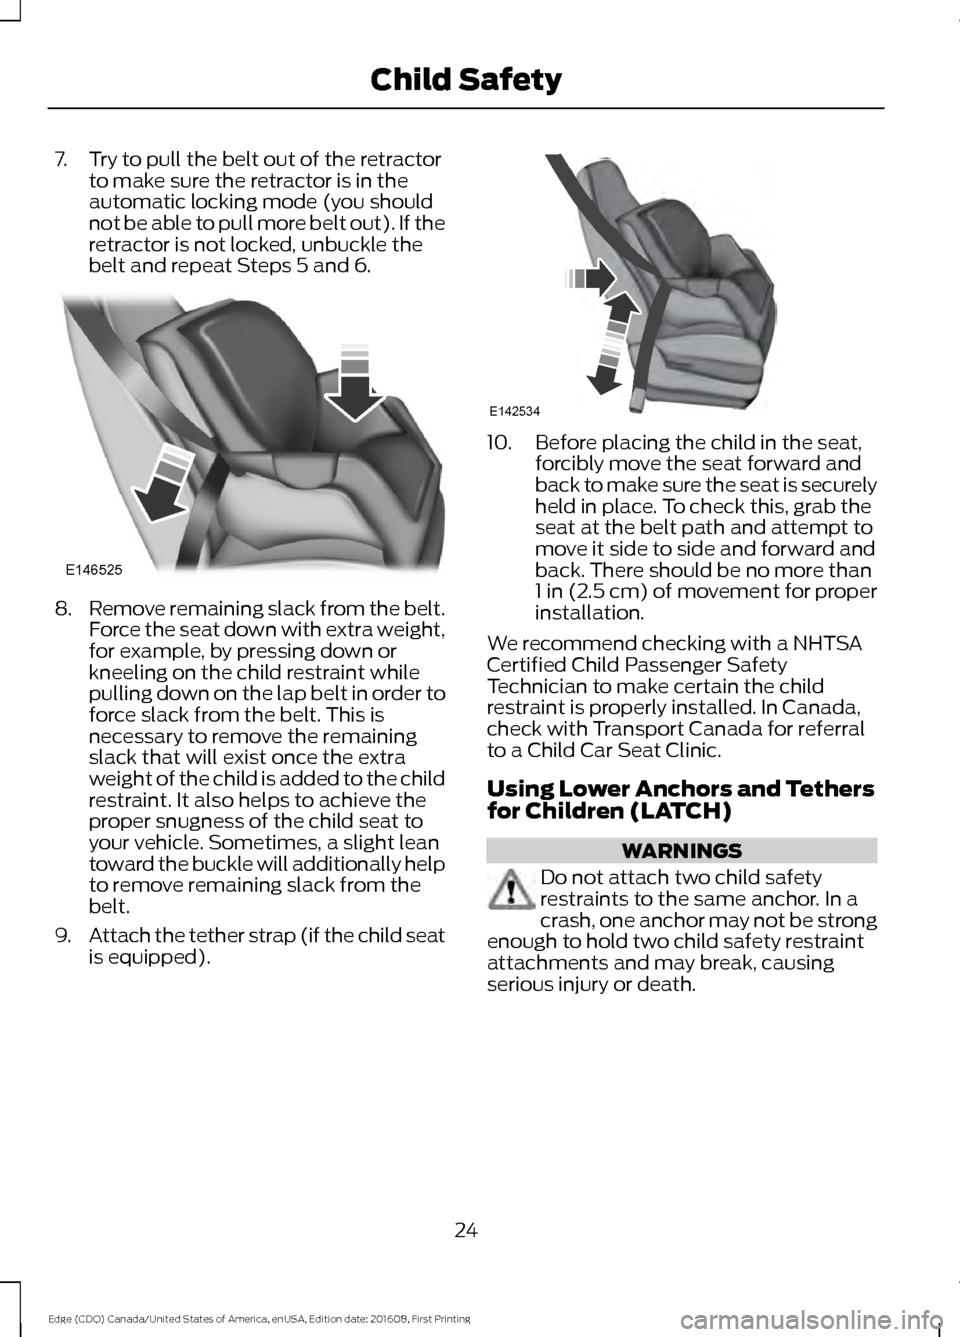 FORD EDGE 2017 2.G Owners Manual 7. Try to pull the belt out of the retractor
to make sure the retractor is in the
automatic locking mode (you should
not be able to pull more belt out). If the
retractor is not locked, unbuckle the
be